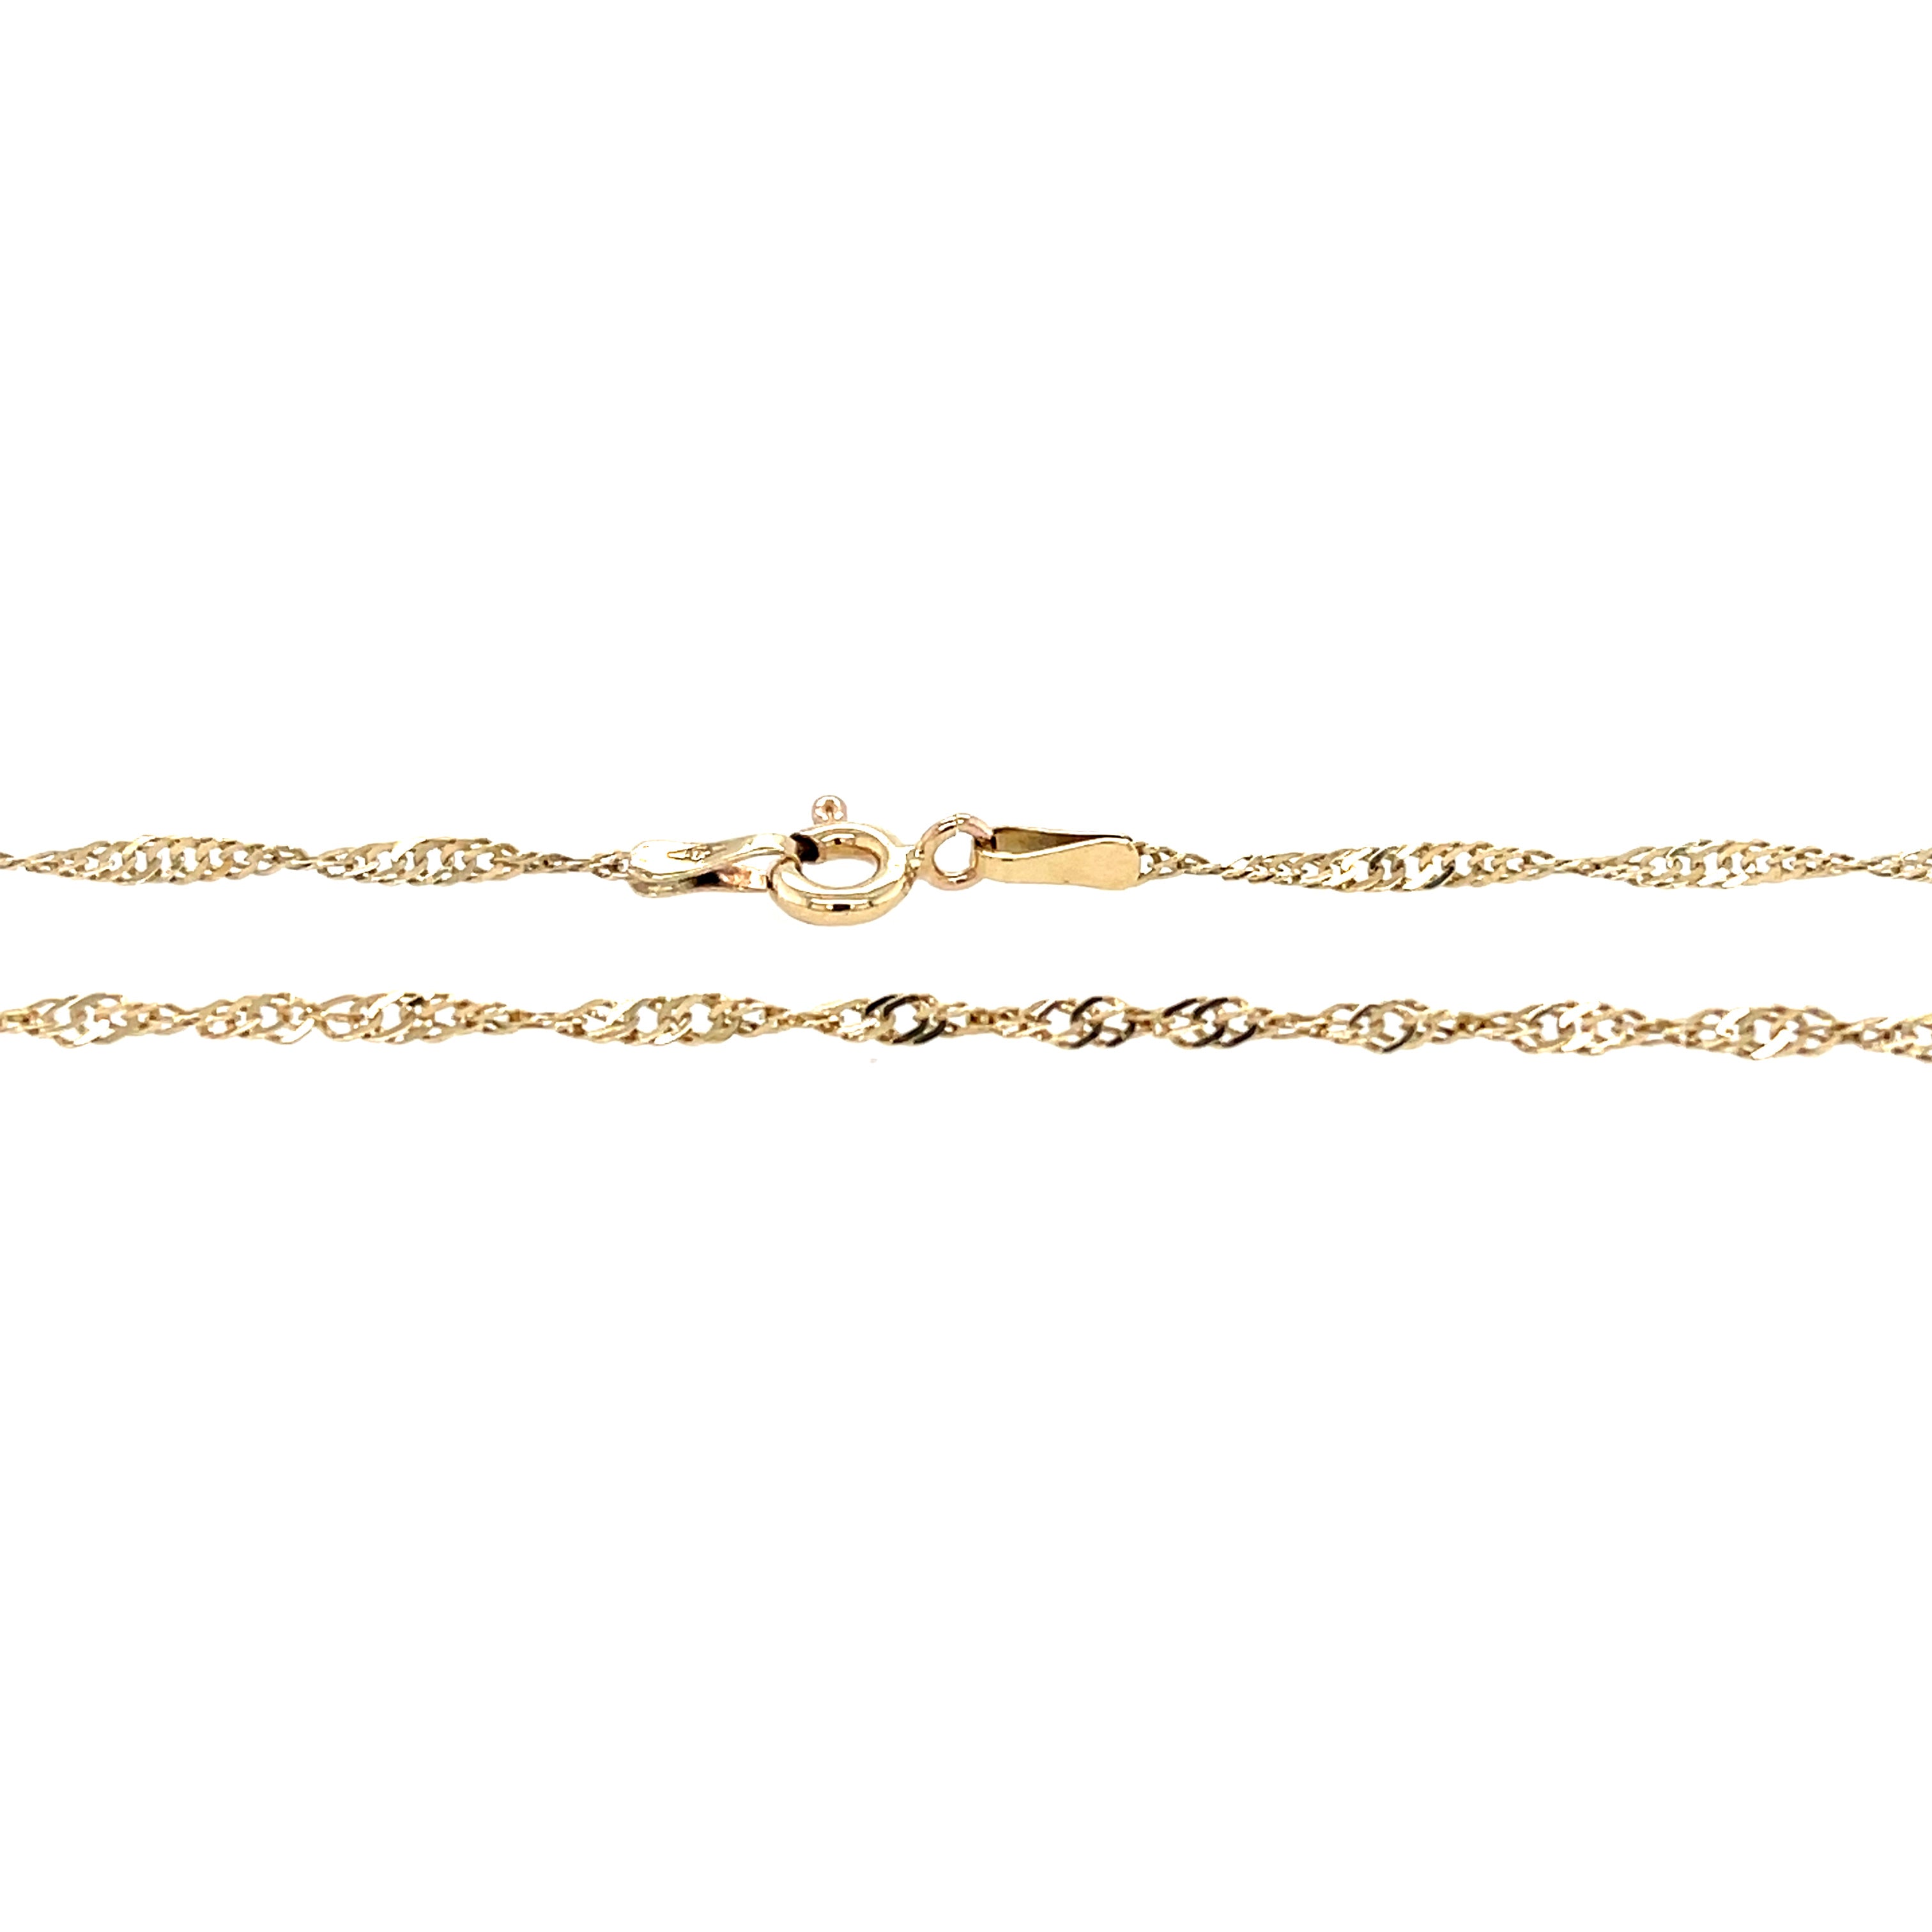 9ct Yellow Gold 18" Singapore Link Chain - 1.70g SOLD